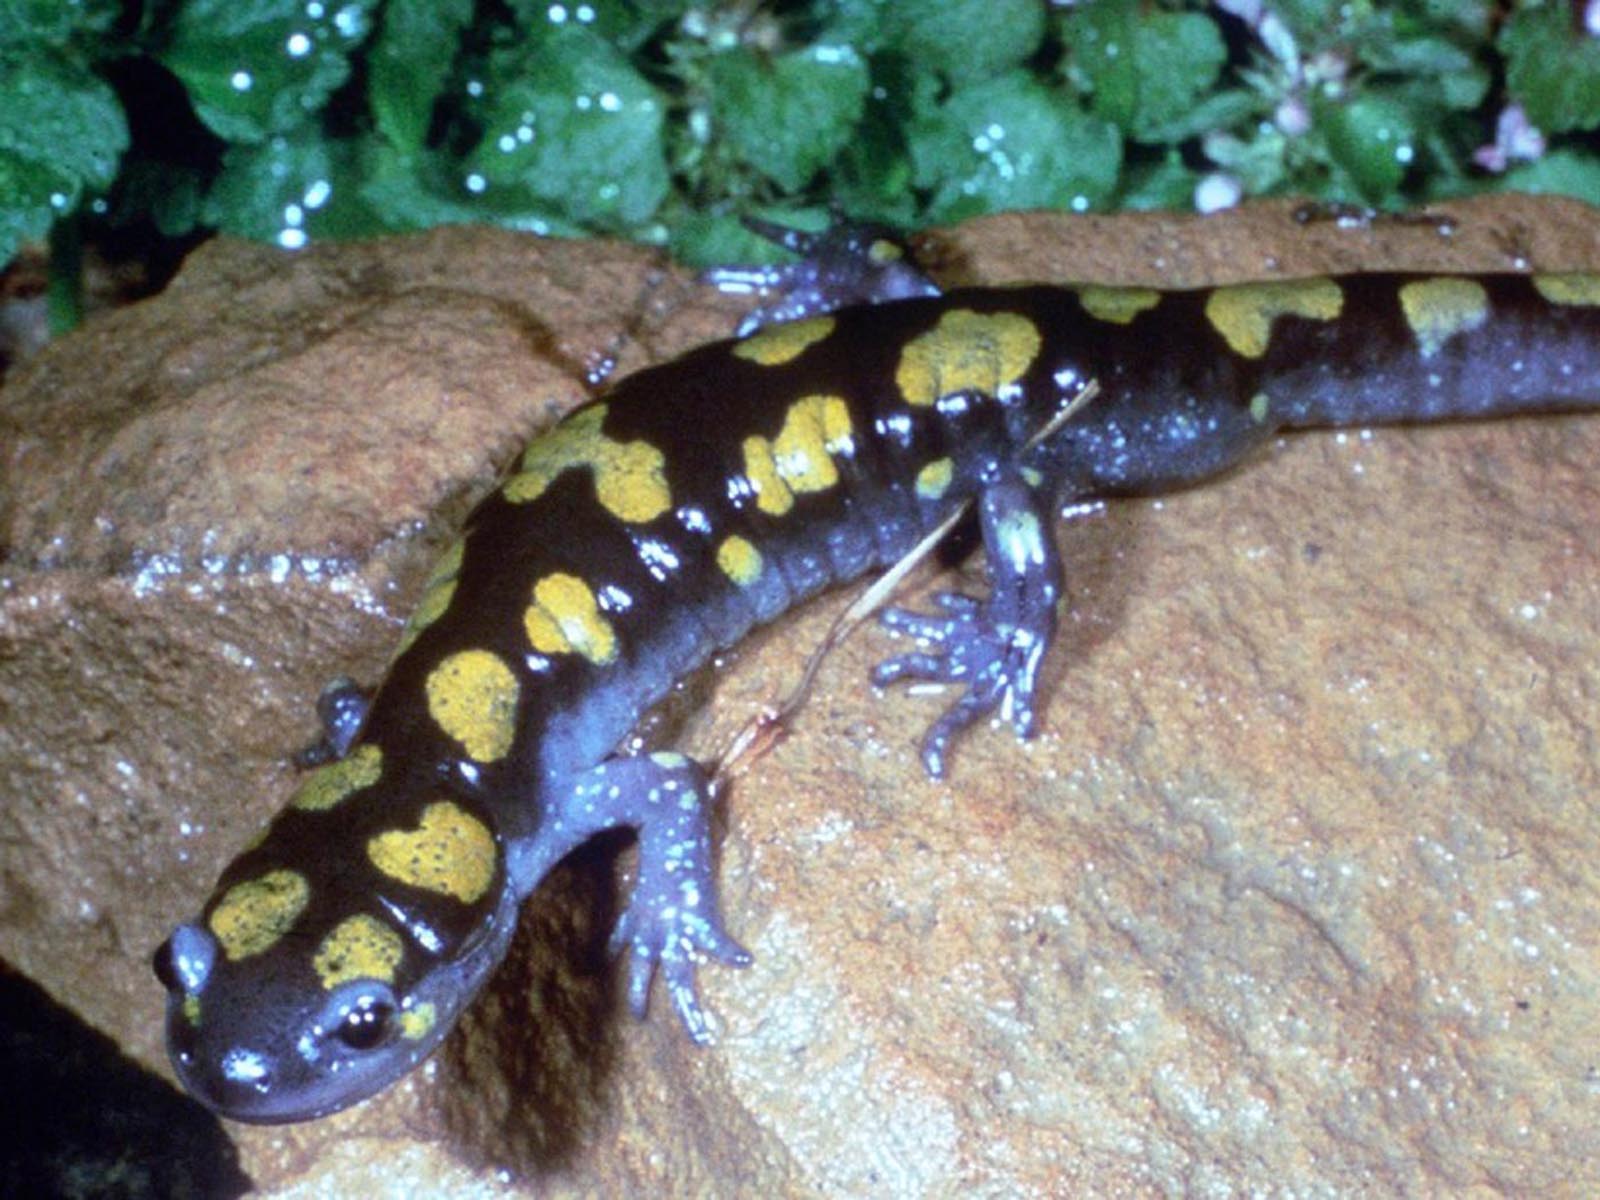 Spotted Salamander, Great Smoky Mountains National Park, Carolina/Tennessee | Photo Credit: NPS